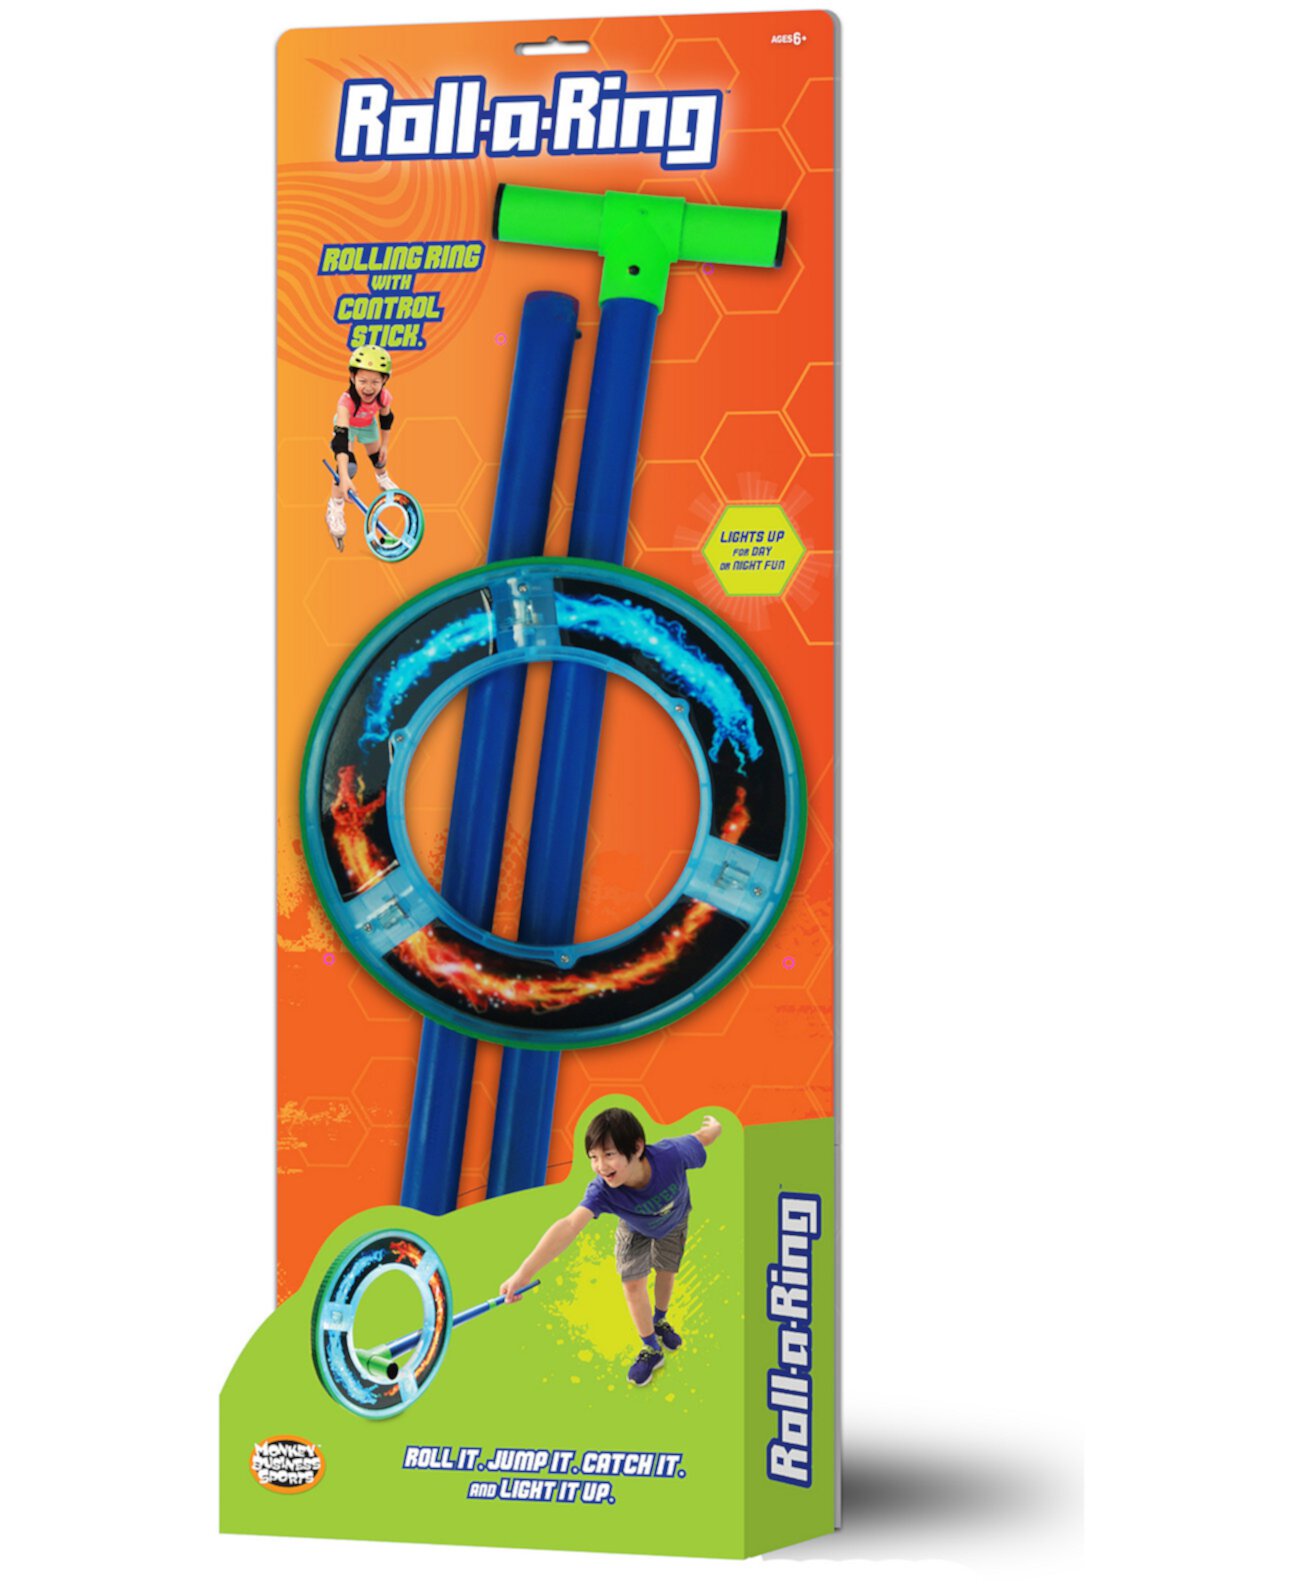 Roll-A-Ring Areyougame